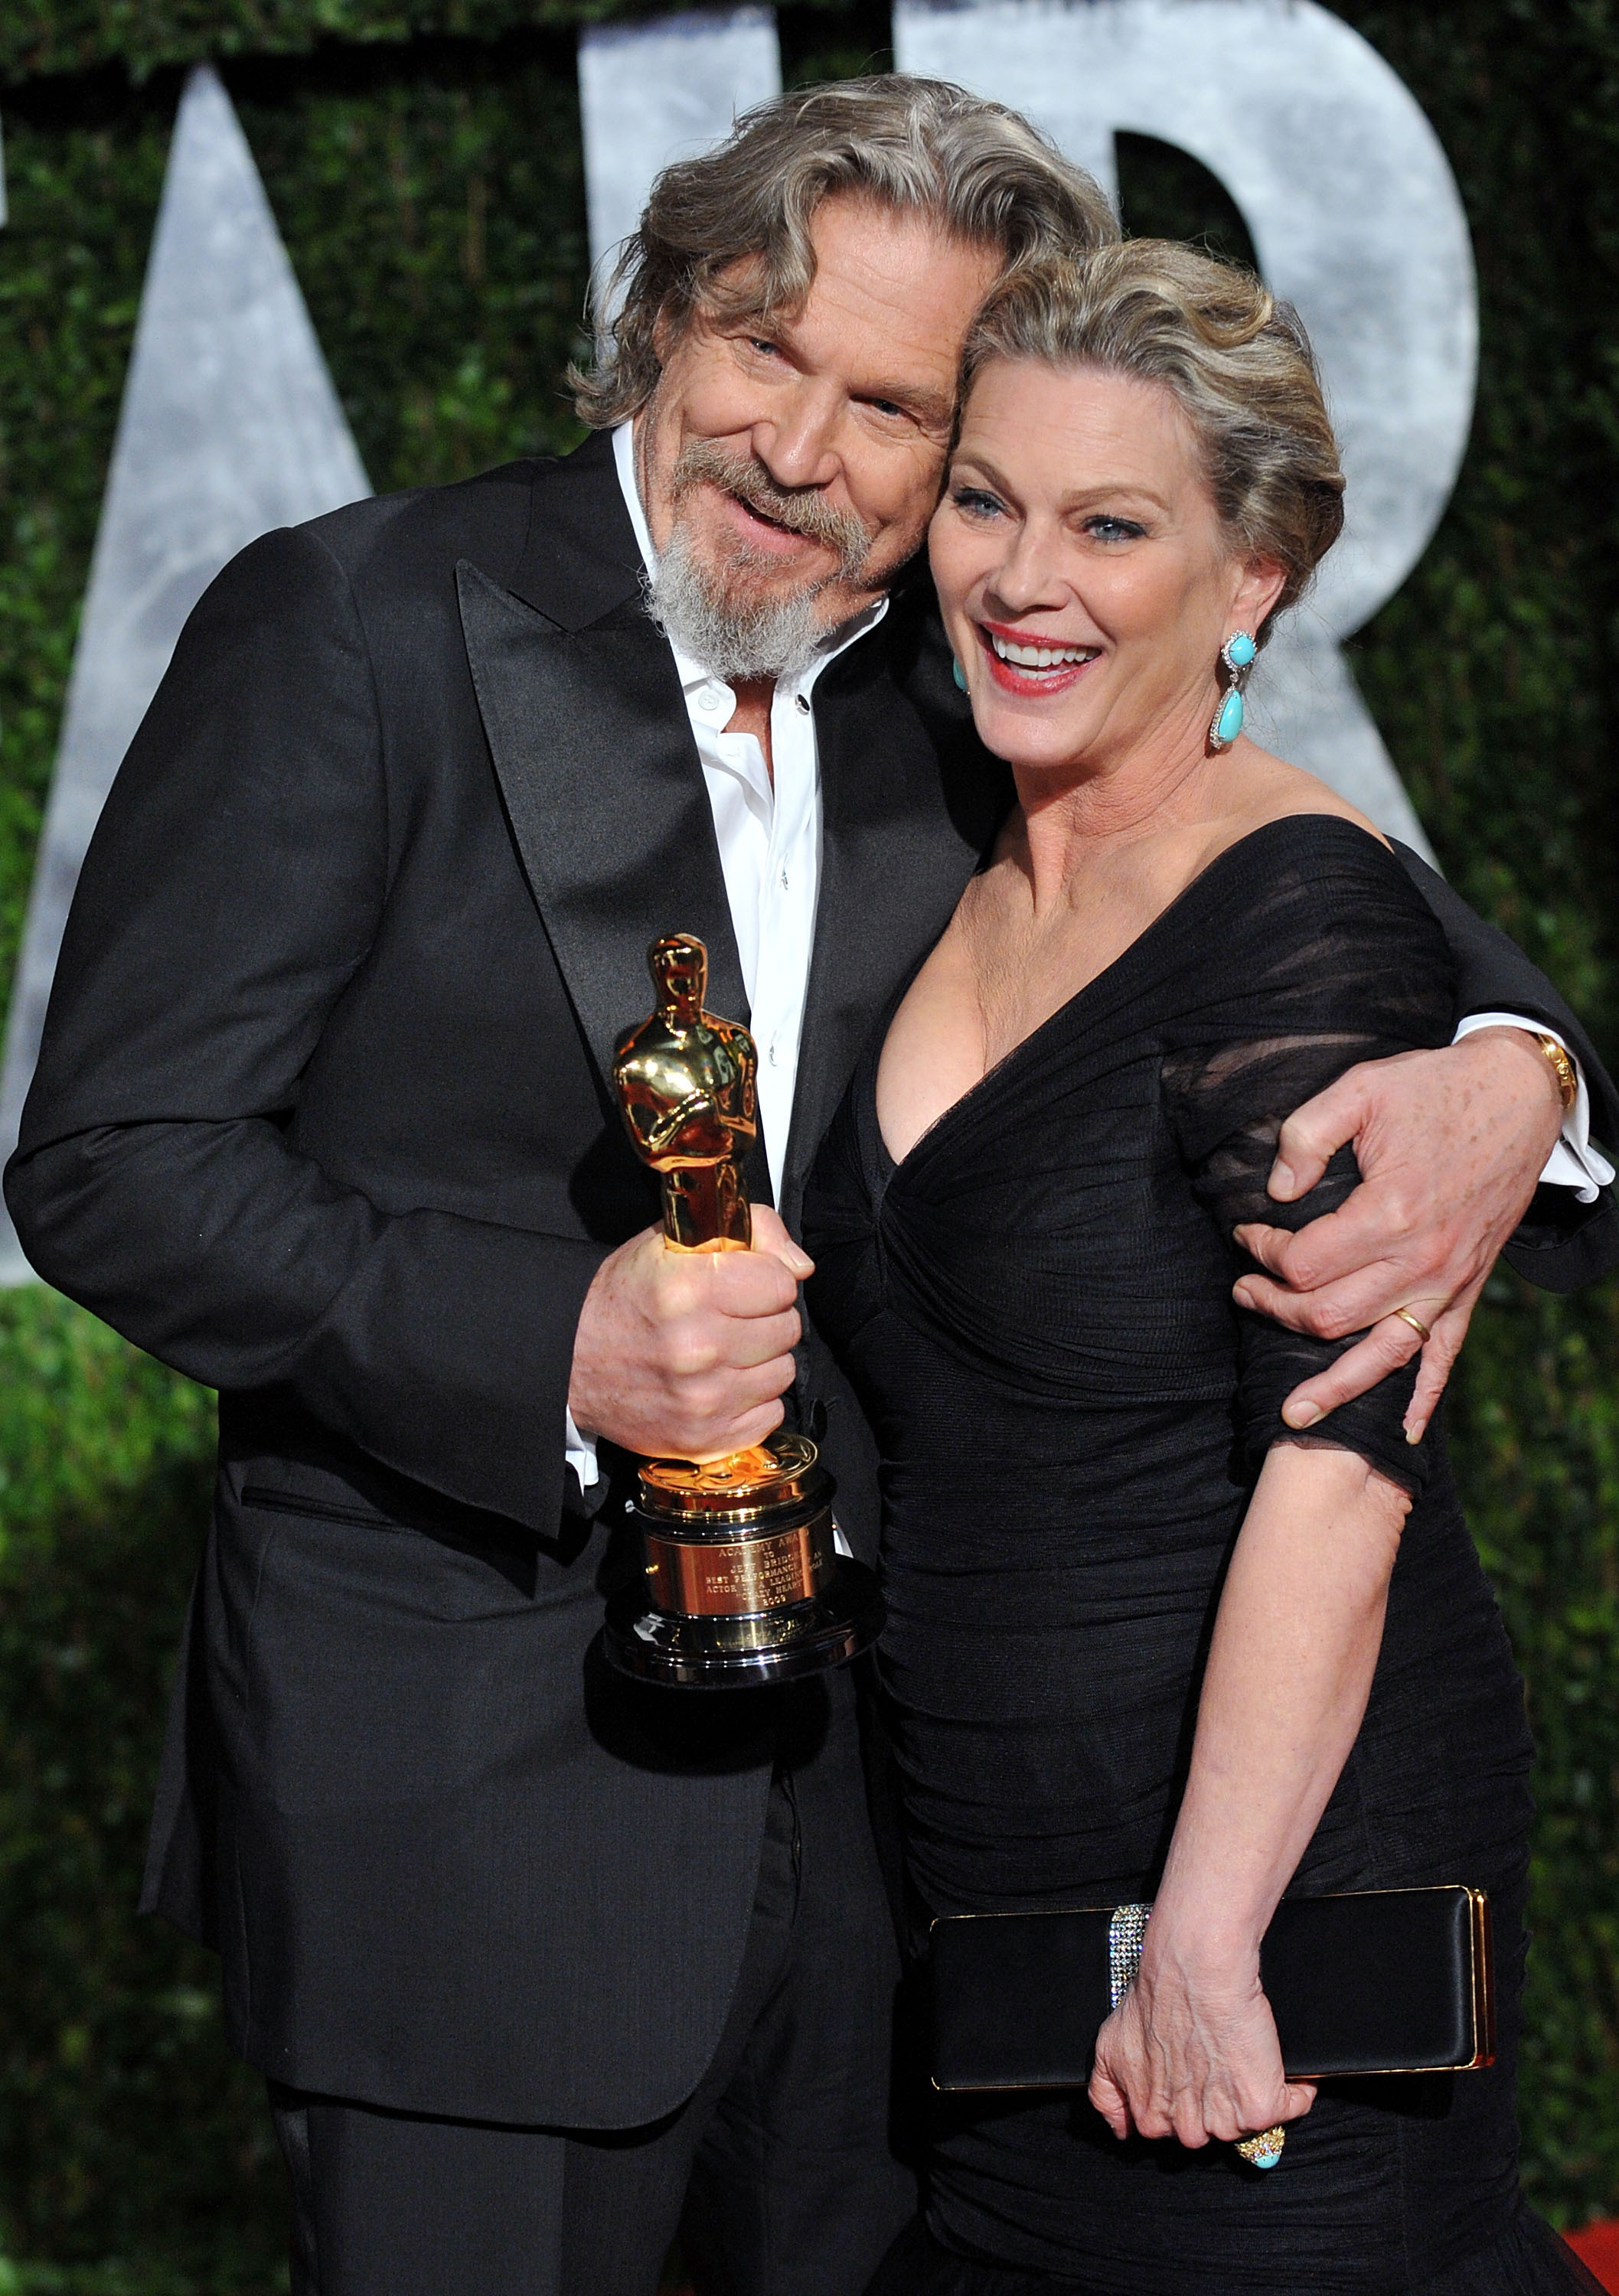 Jeff Bridges and wife Susan Bridges arrive at the 2010 Vanity Fair Oscar Party at Sunset Tower on March 7, 2010 in West Hollywood, California | Source: Getty Images 